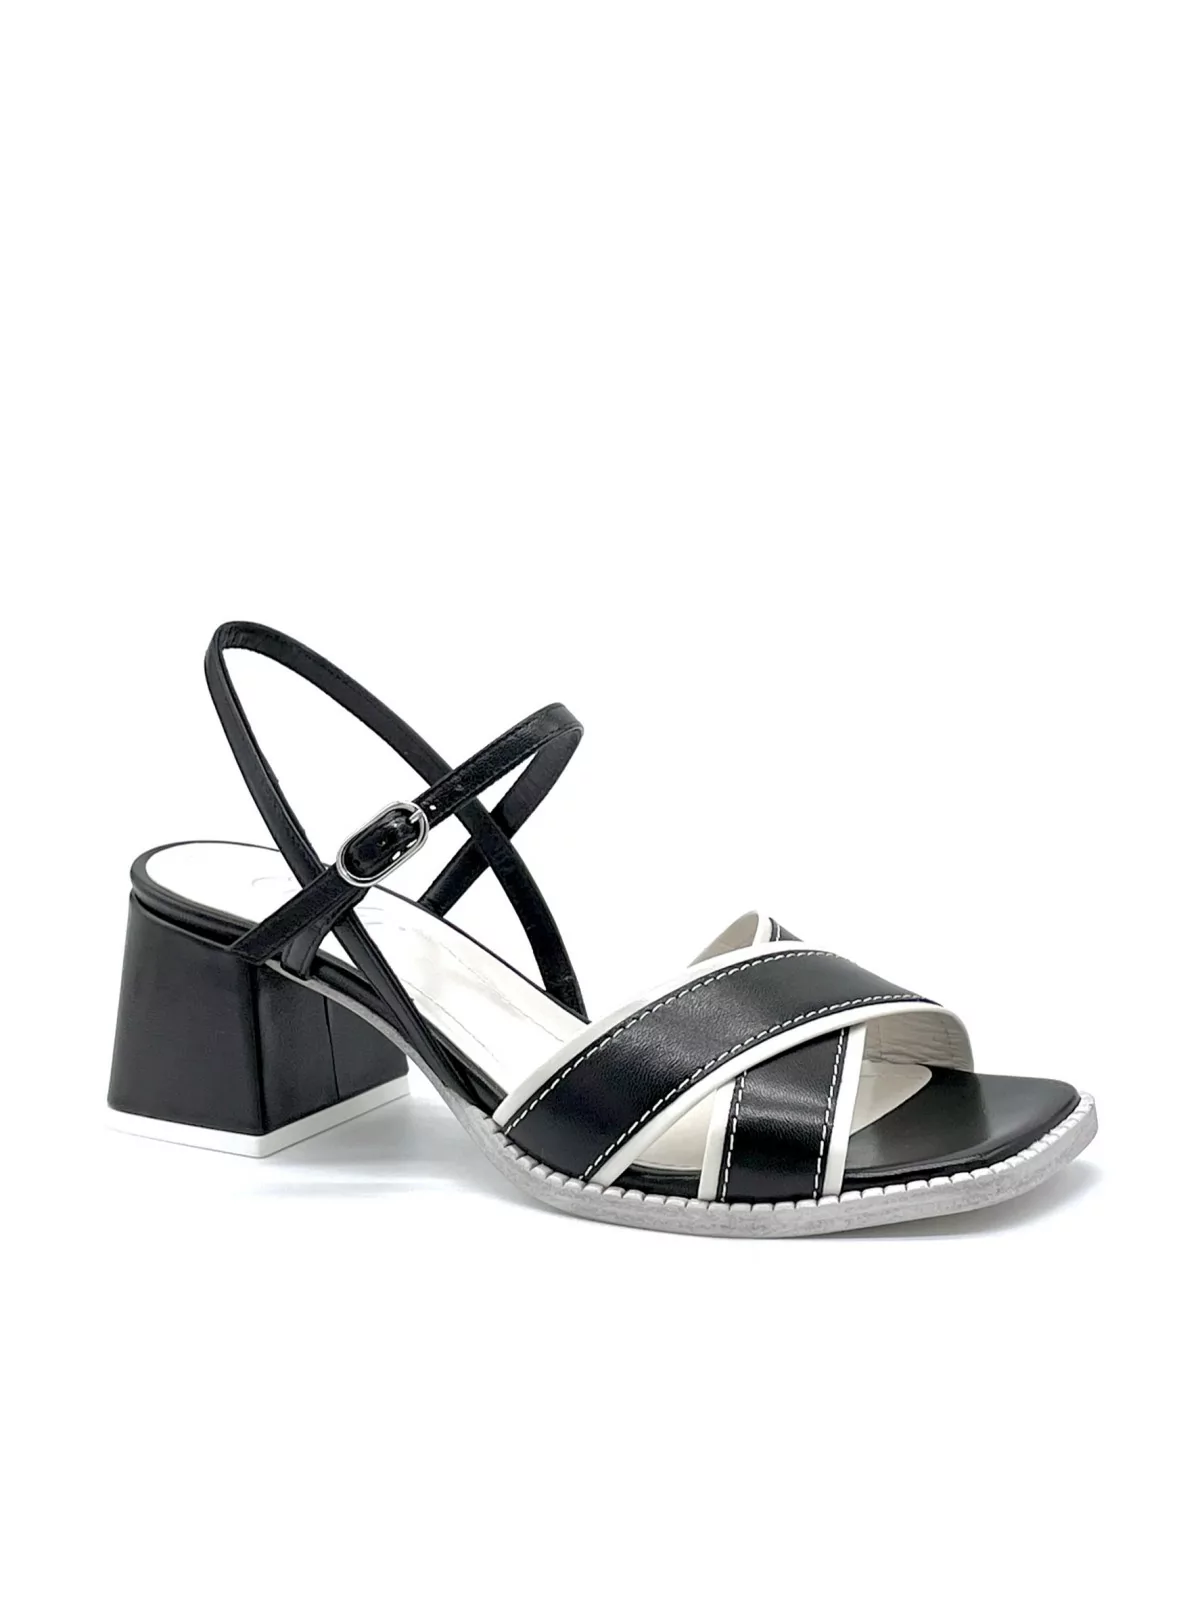 Black and white leather sandal. Leather lining. Leather sole. 5,5 cm heel.